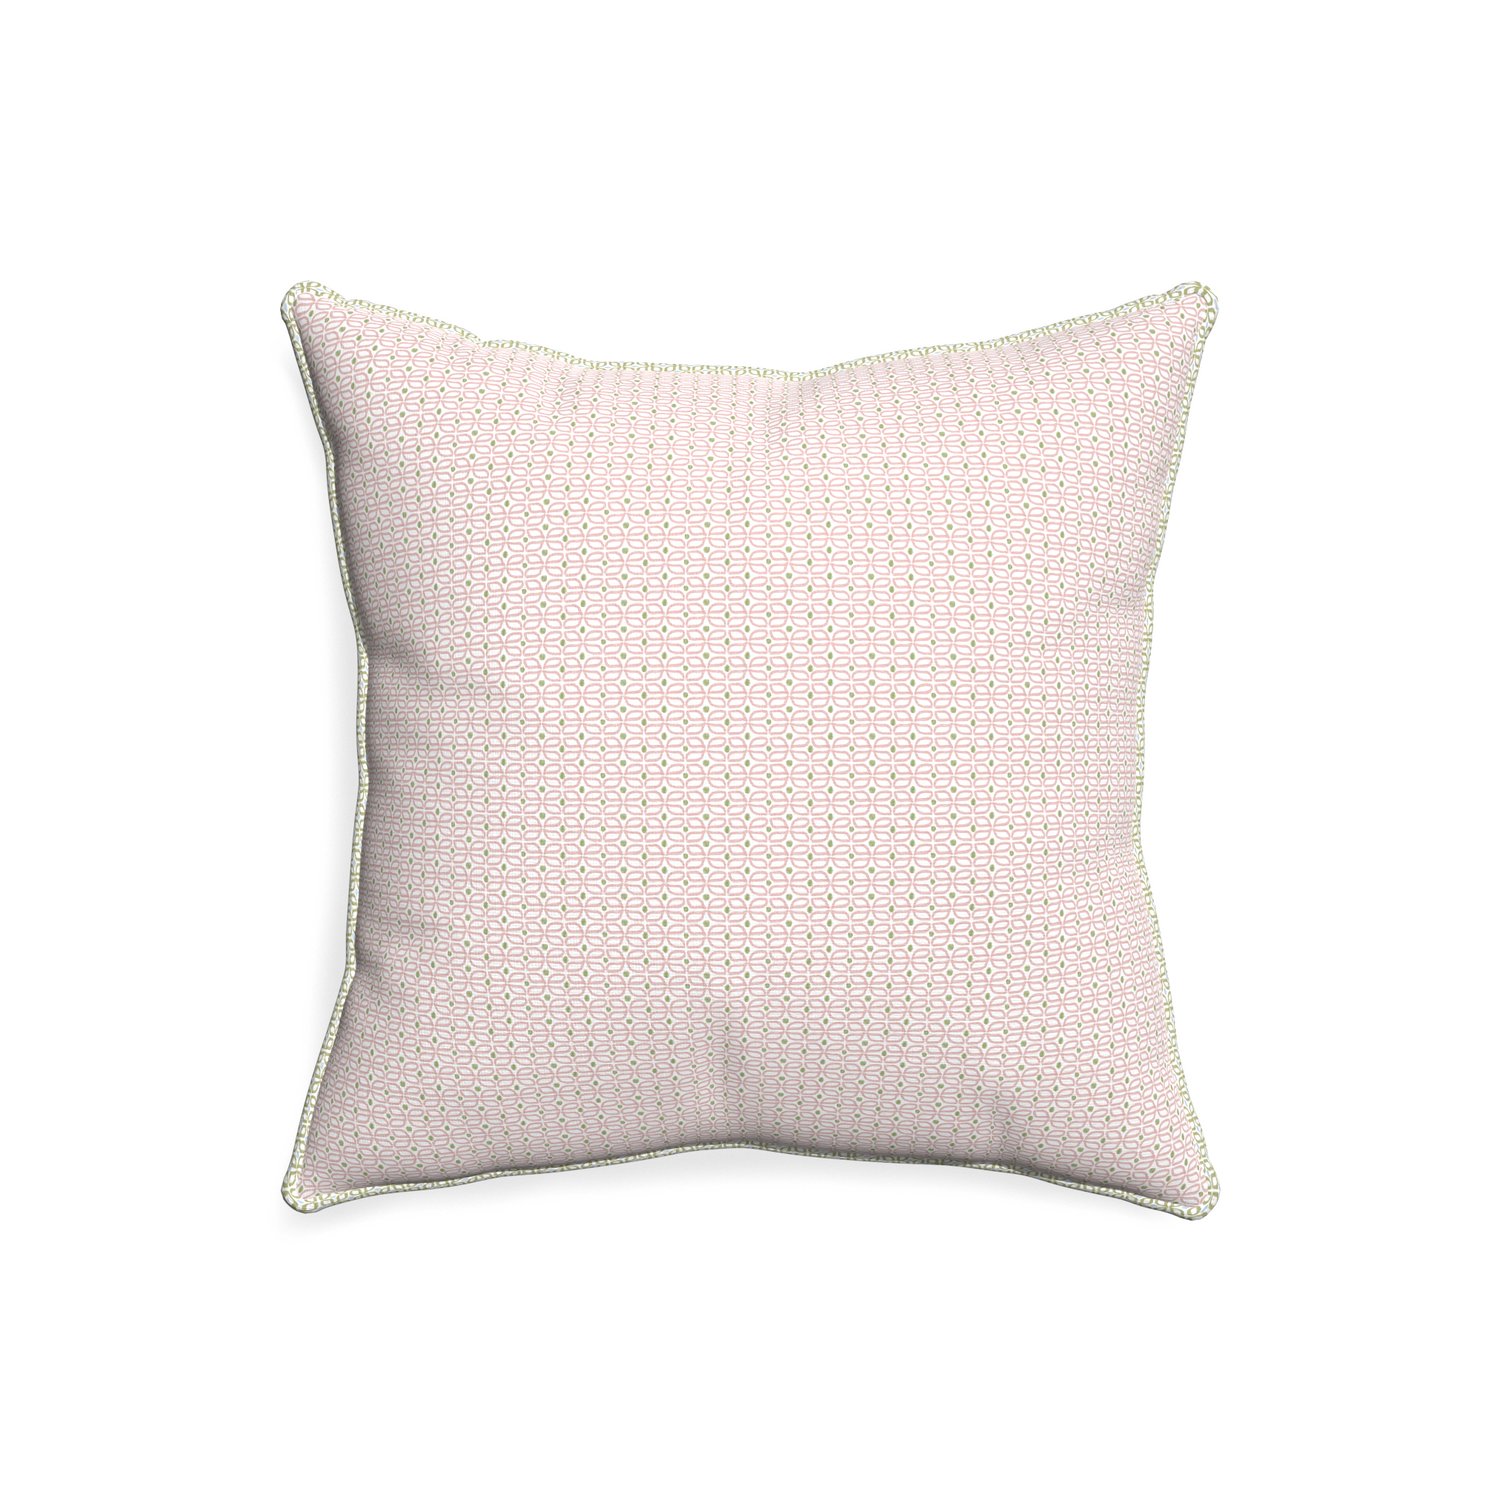 20-square loomi pink custom pillow with l piping on white background